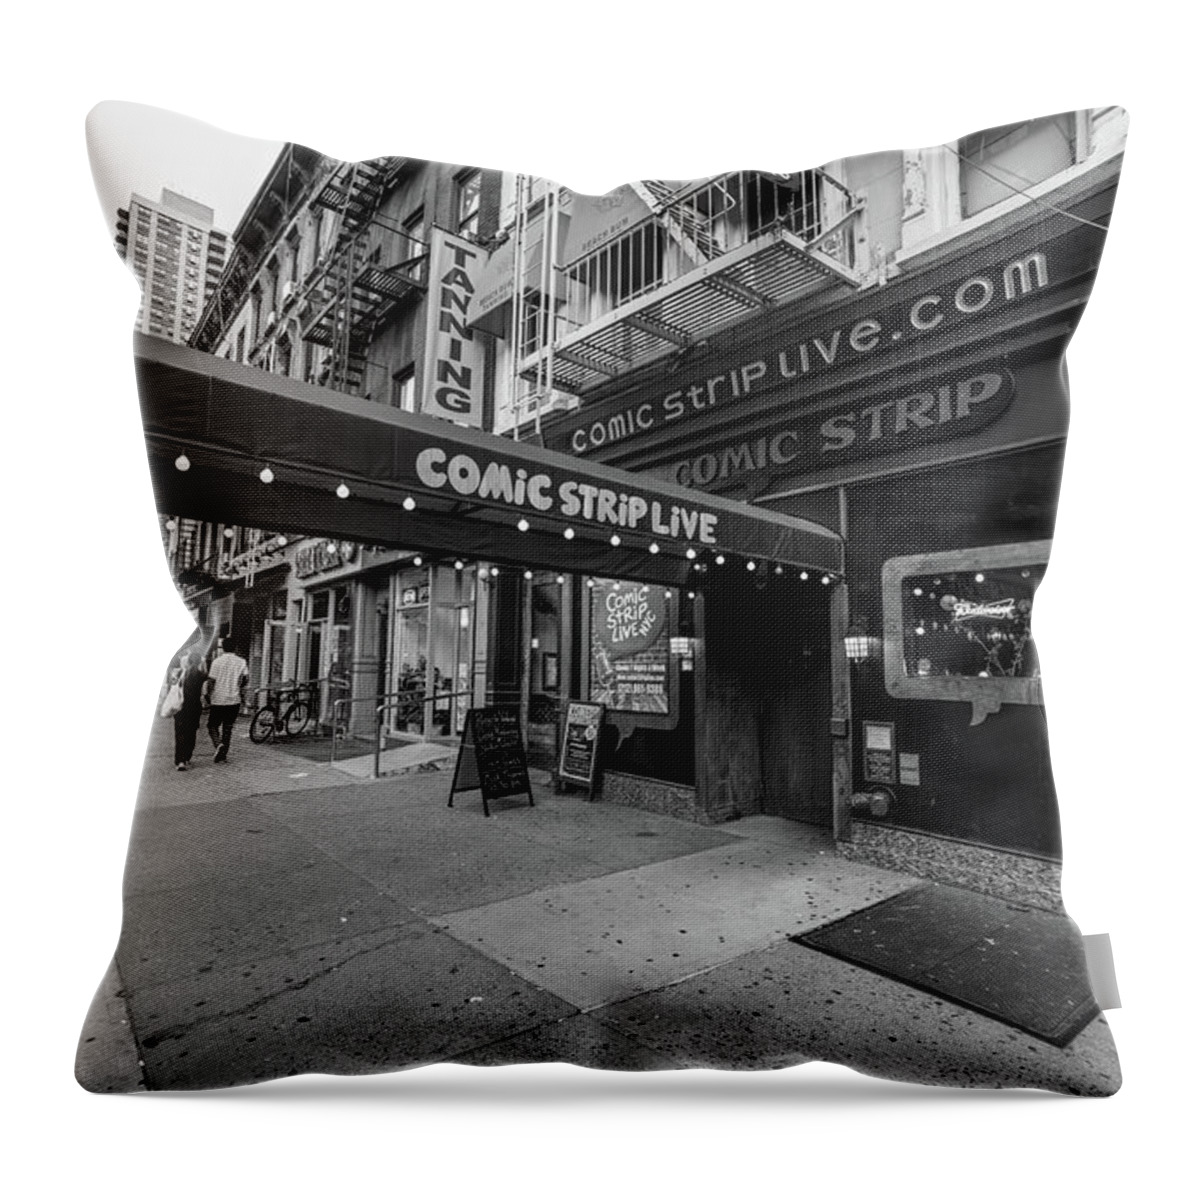 B&w Throw Pillow featuring the photograph Comic Strip Live by John McGraw